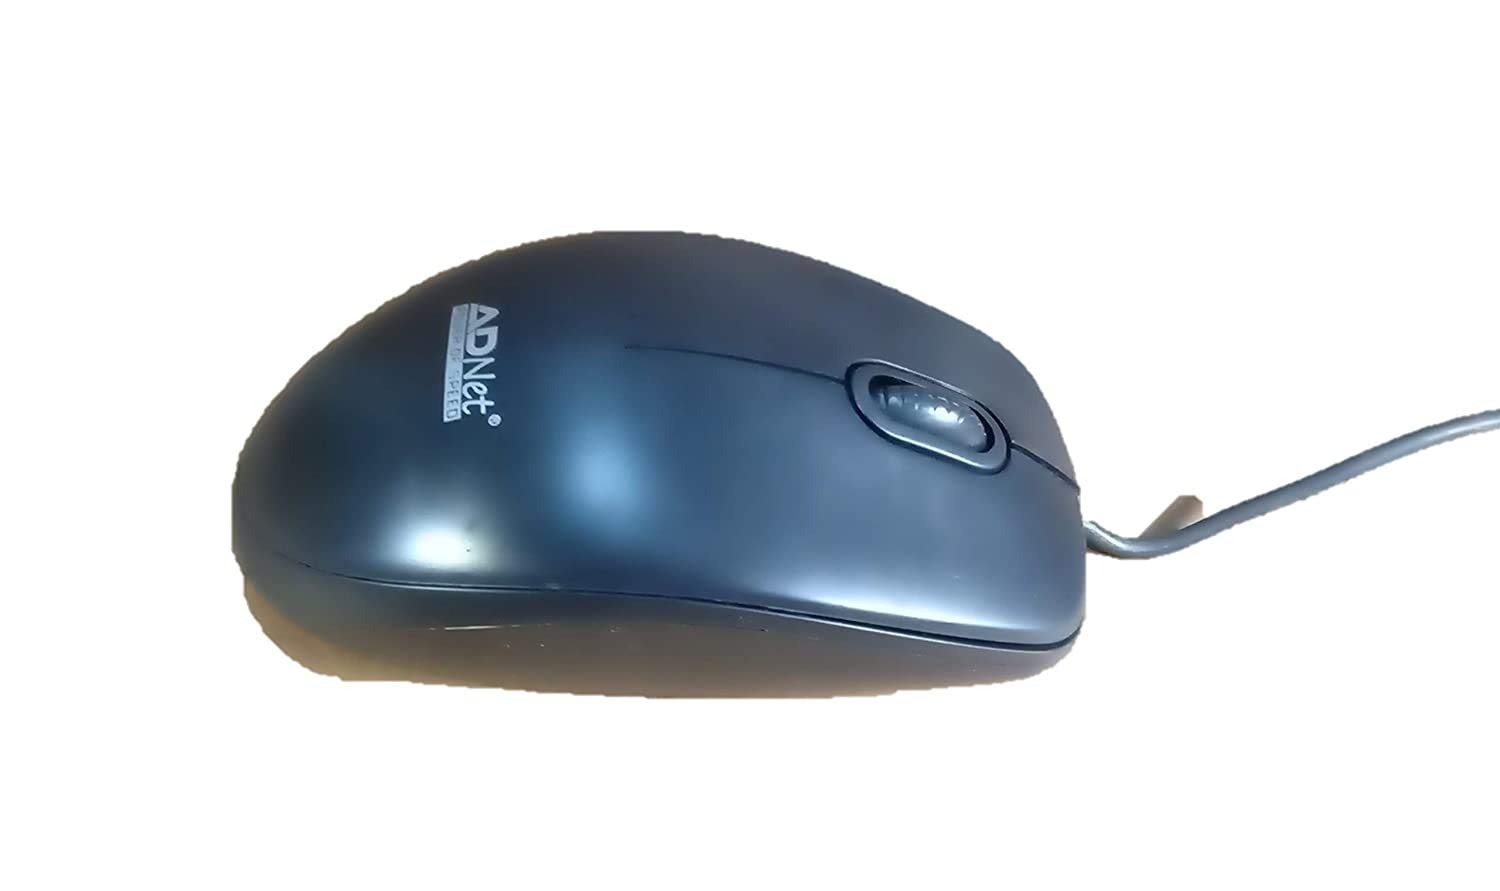 Adnet AD-202-3D USB Wired Optical Mouse | High Precision | Ergonomic | Plug & Play (Black)